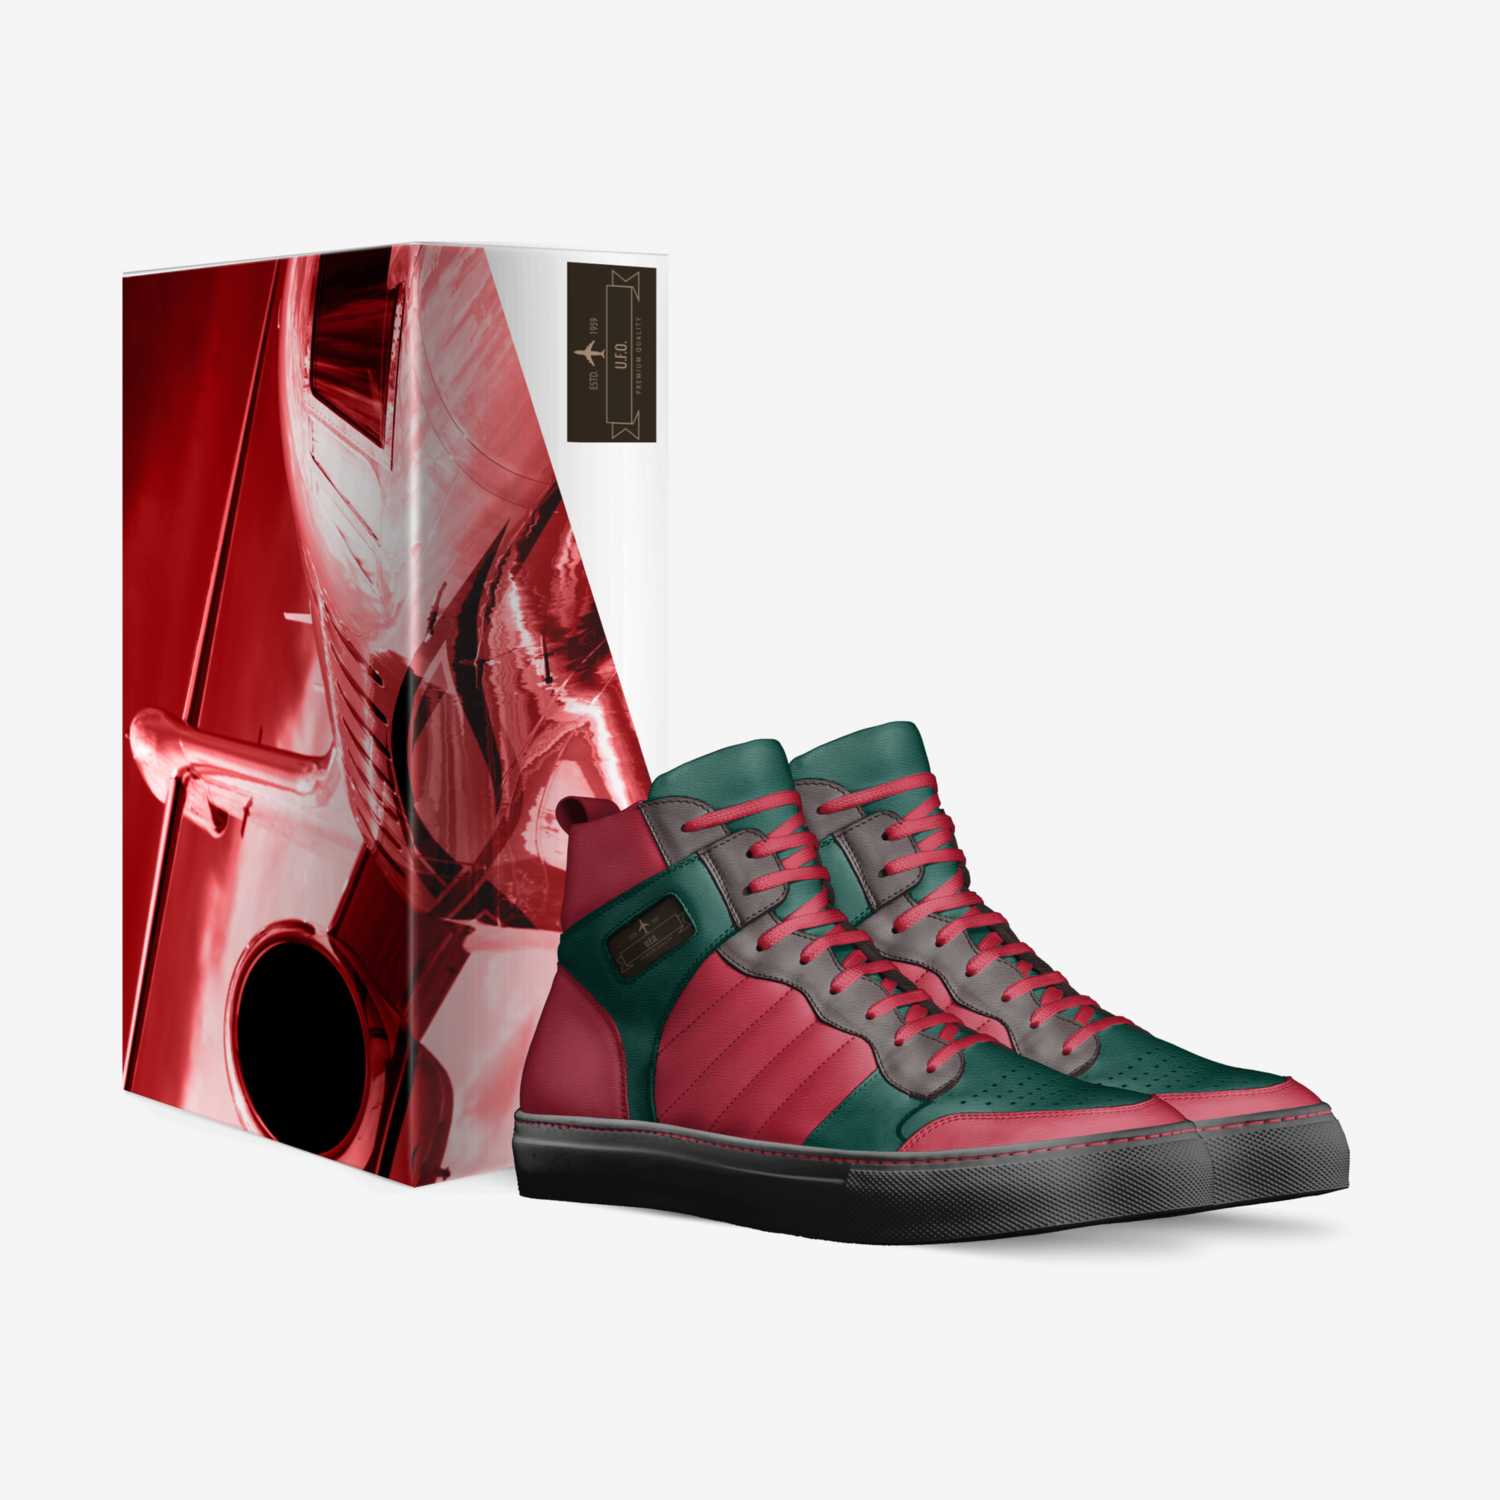 U.F.O. custom made in Italy shoes by Mark Lopes | Box view